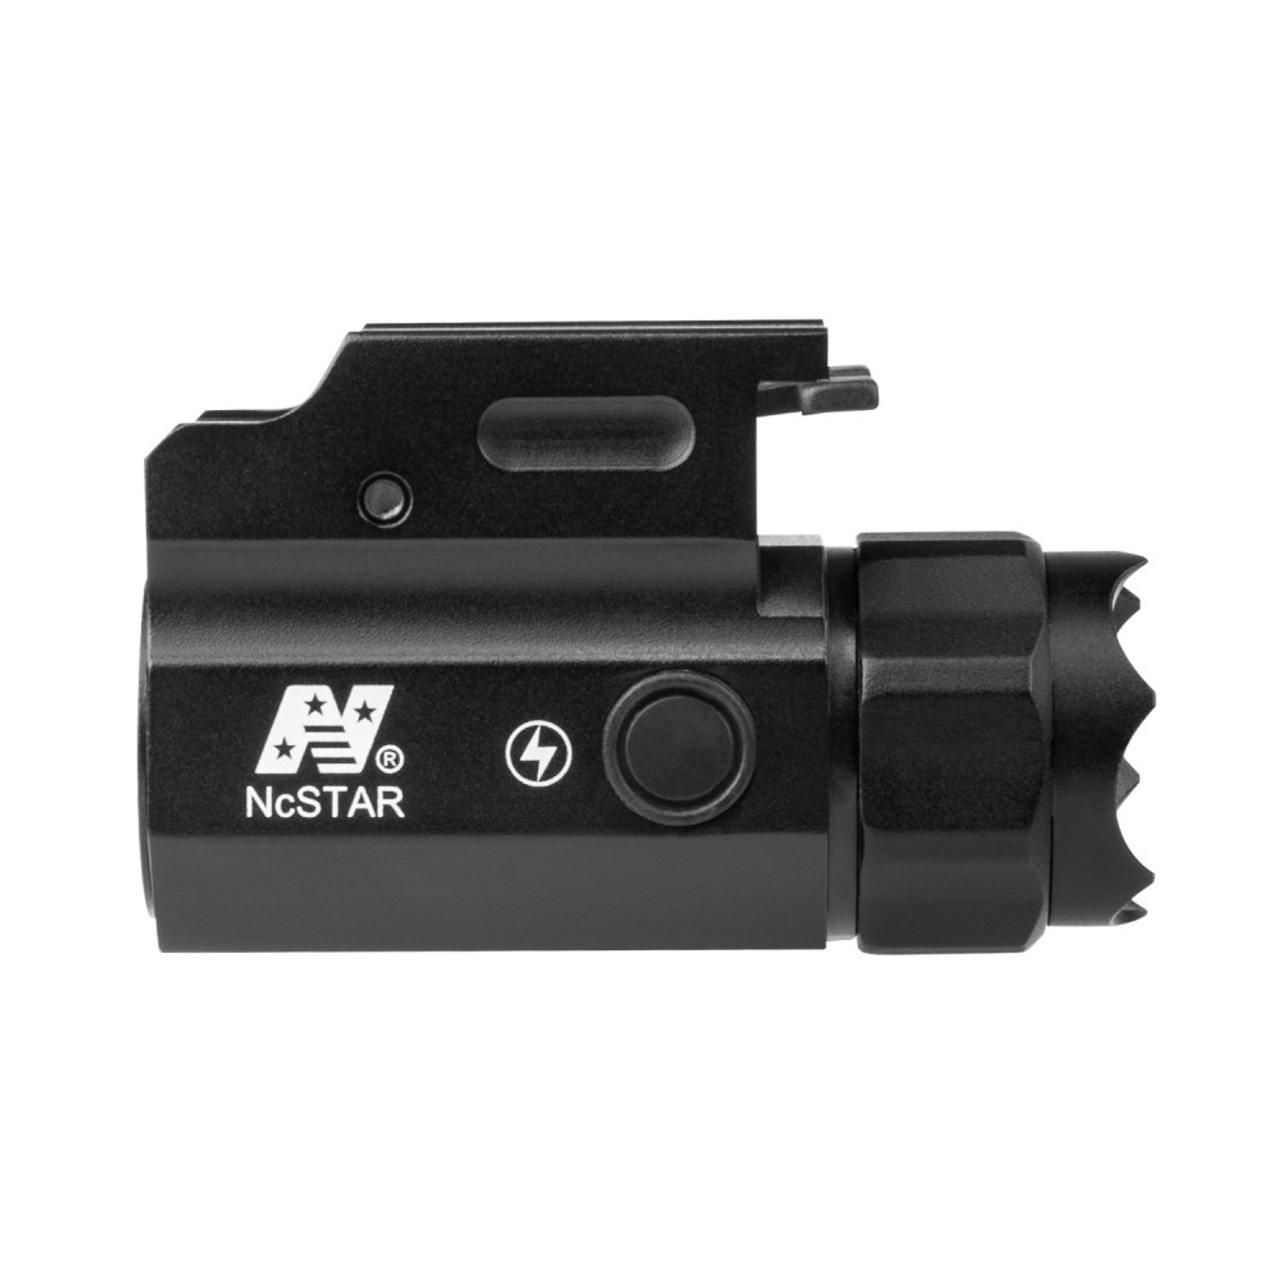 NcStar 150 Lumen LED Compact Quick Release Weapon Light w/ Strobe